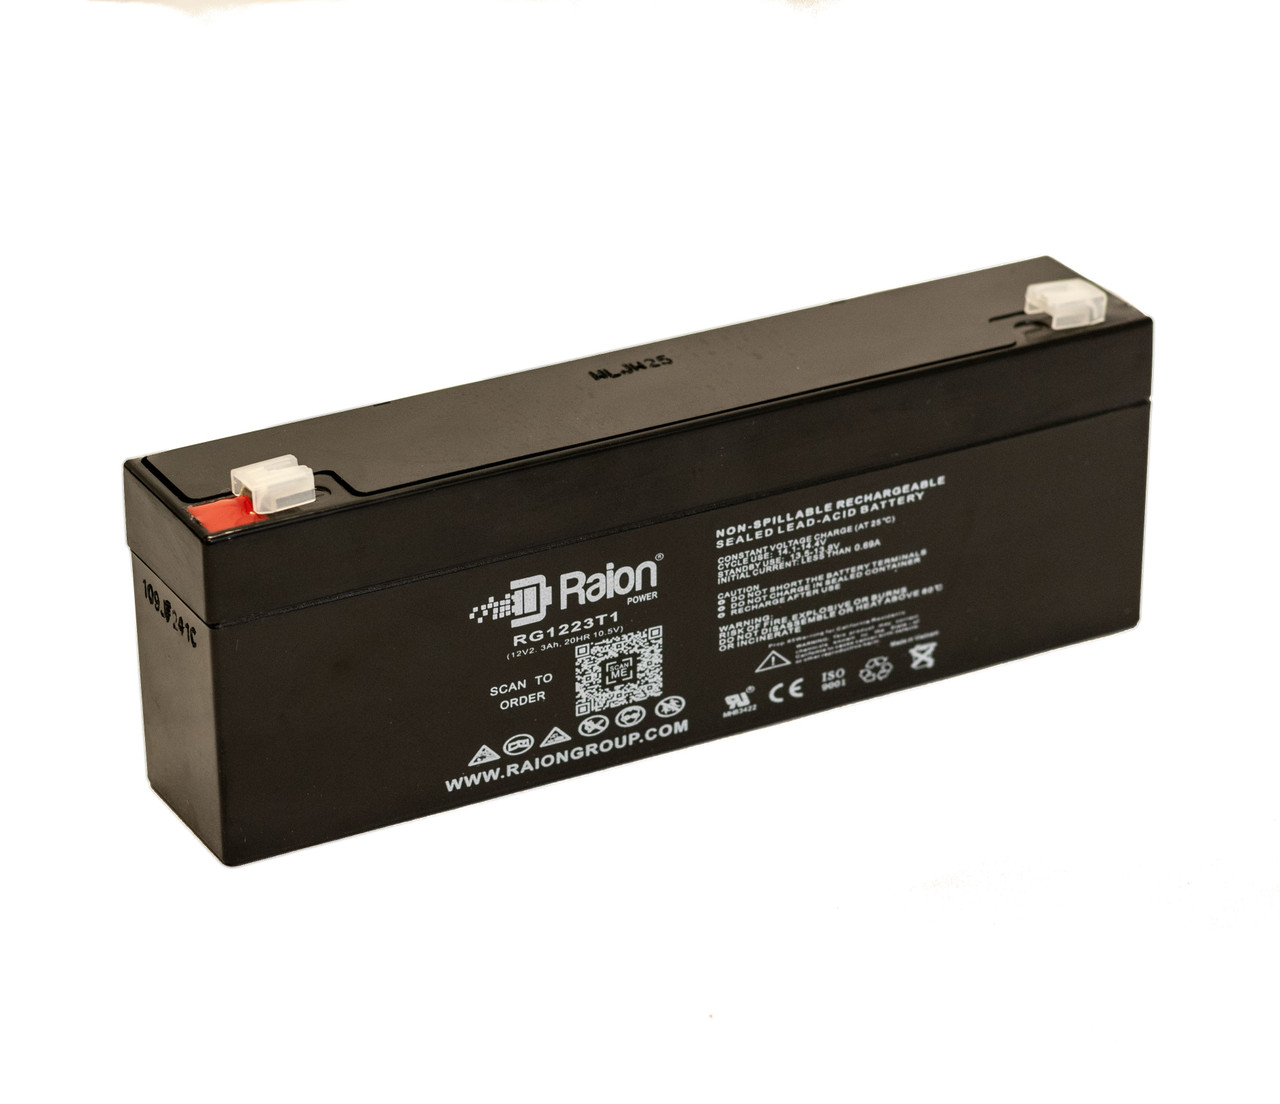 Raion Power RG1223T1 Replacement Battery for Arjo-Century 400